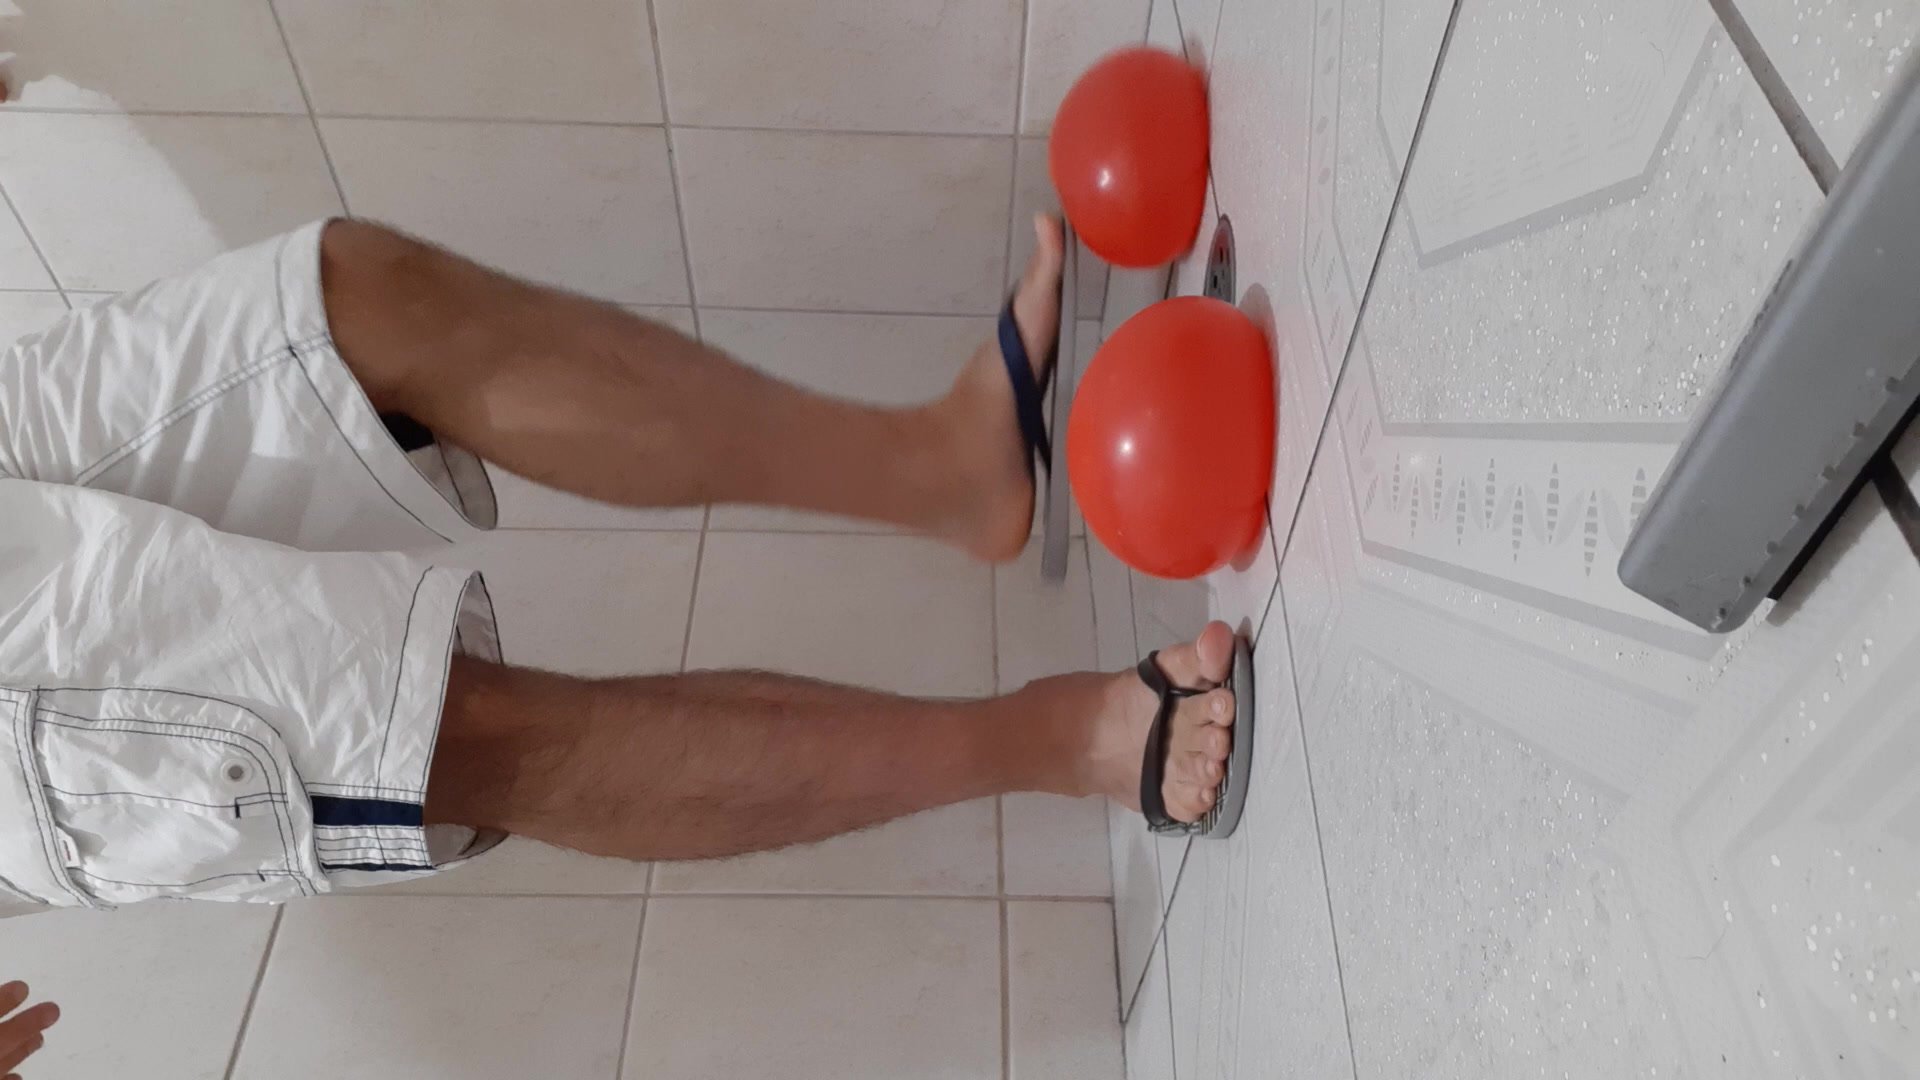 Stepping on Balloons - Part 1